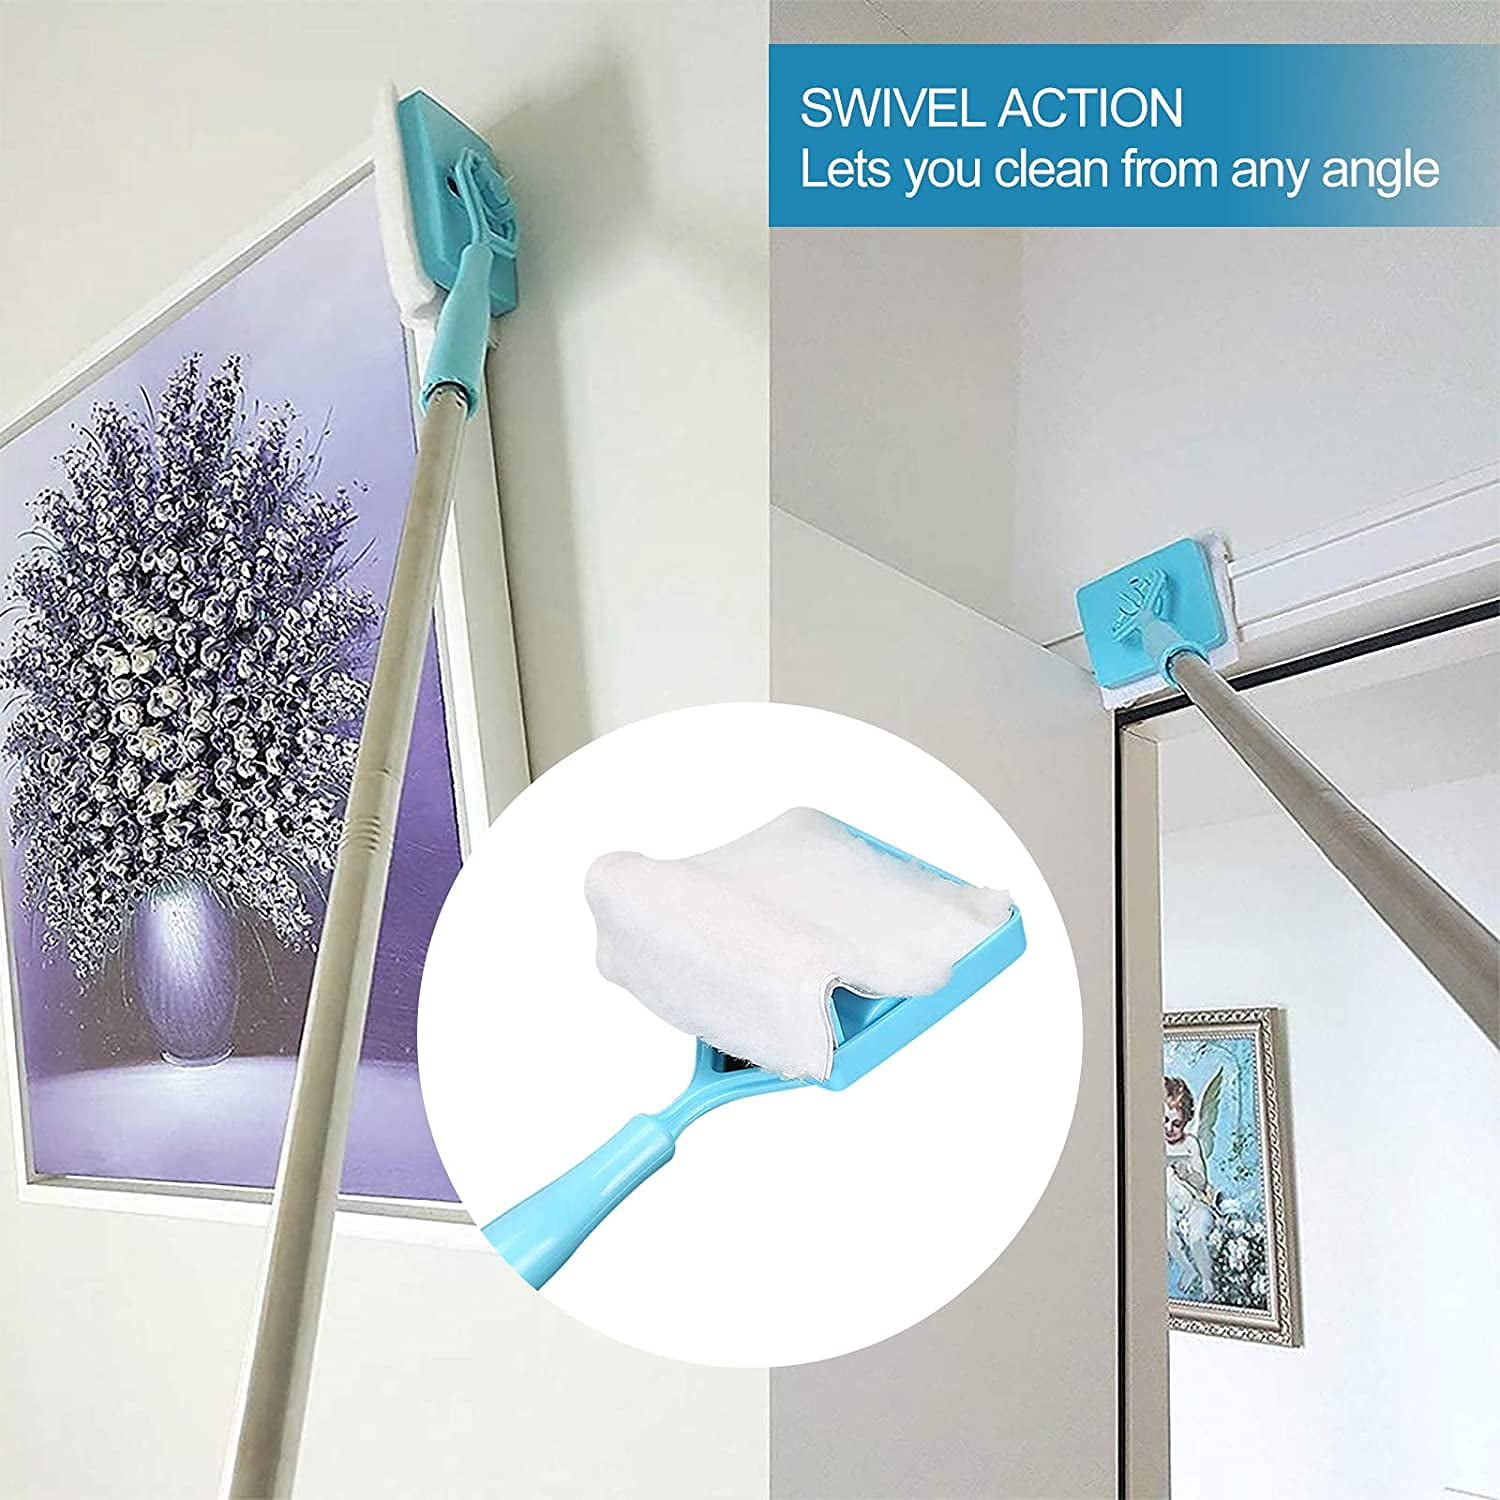 Baseboard Buddy Retractable Household Universal Cleaning Brush Mop